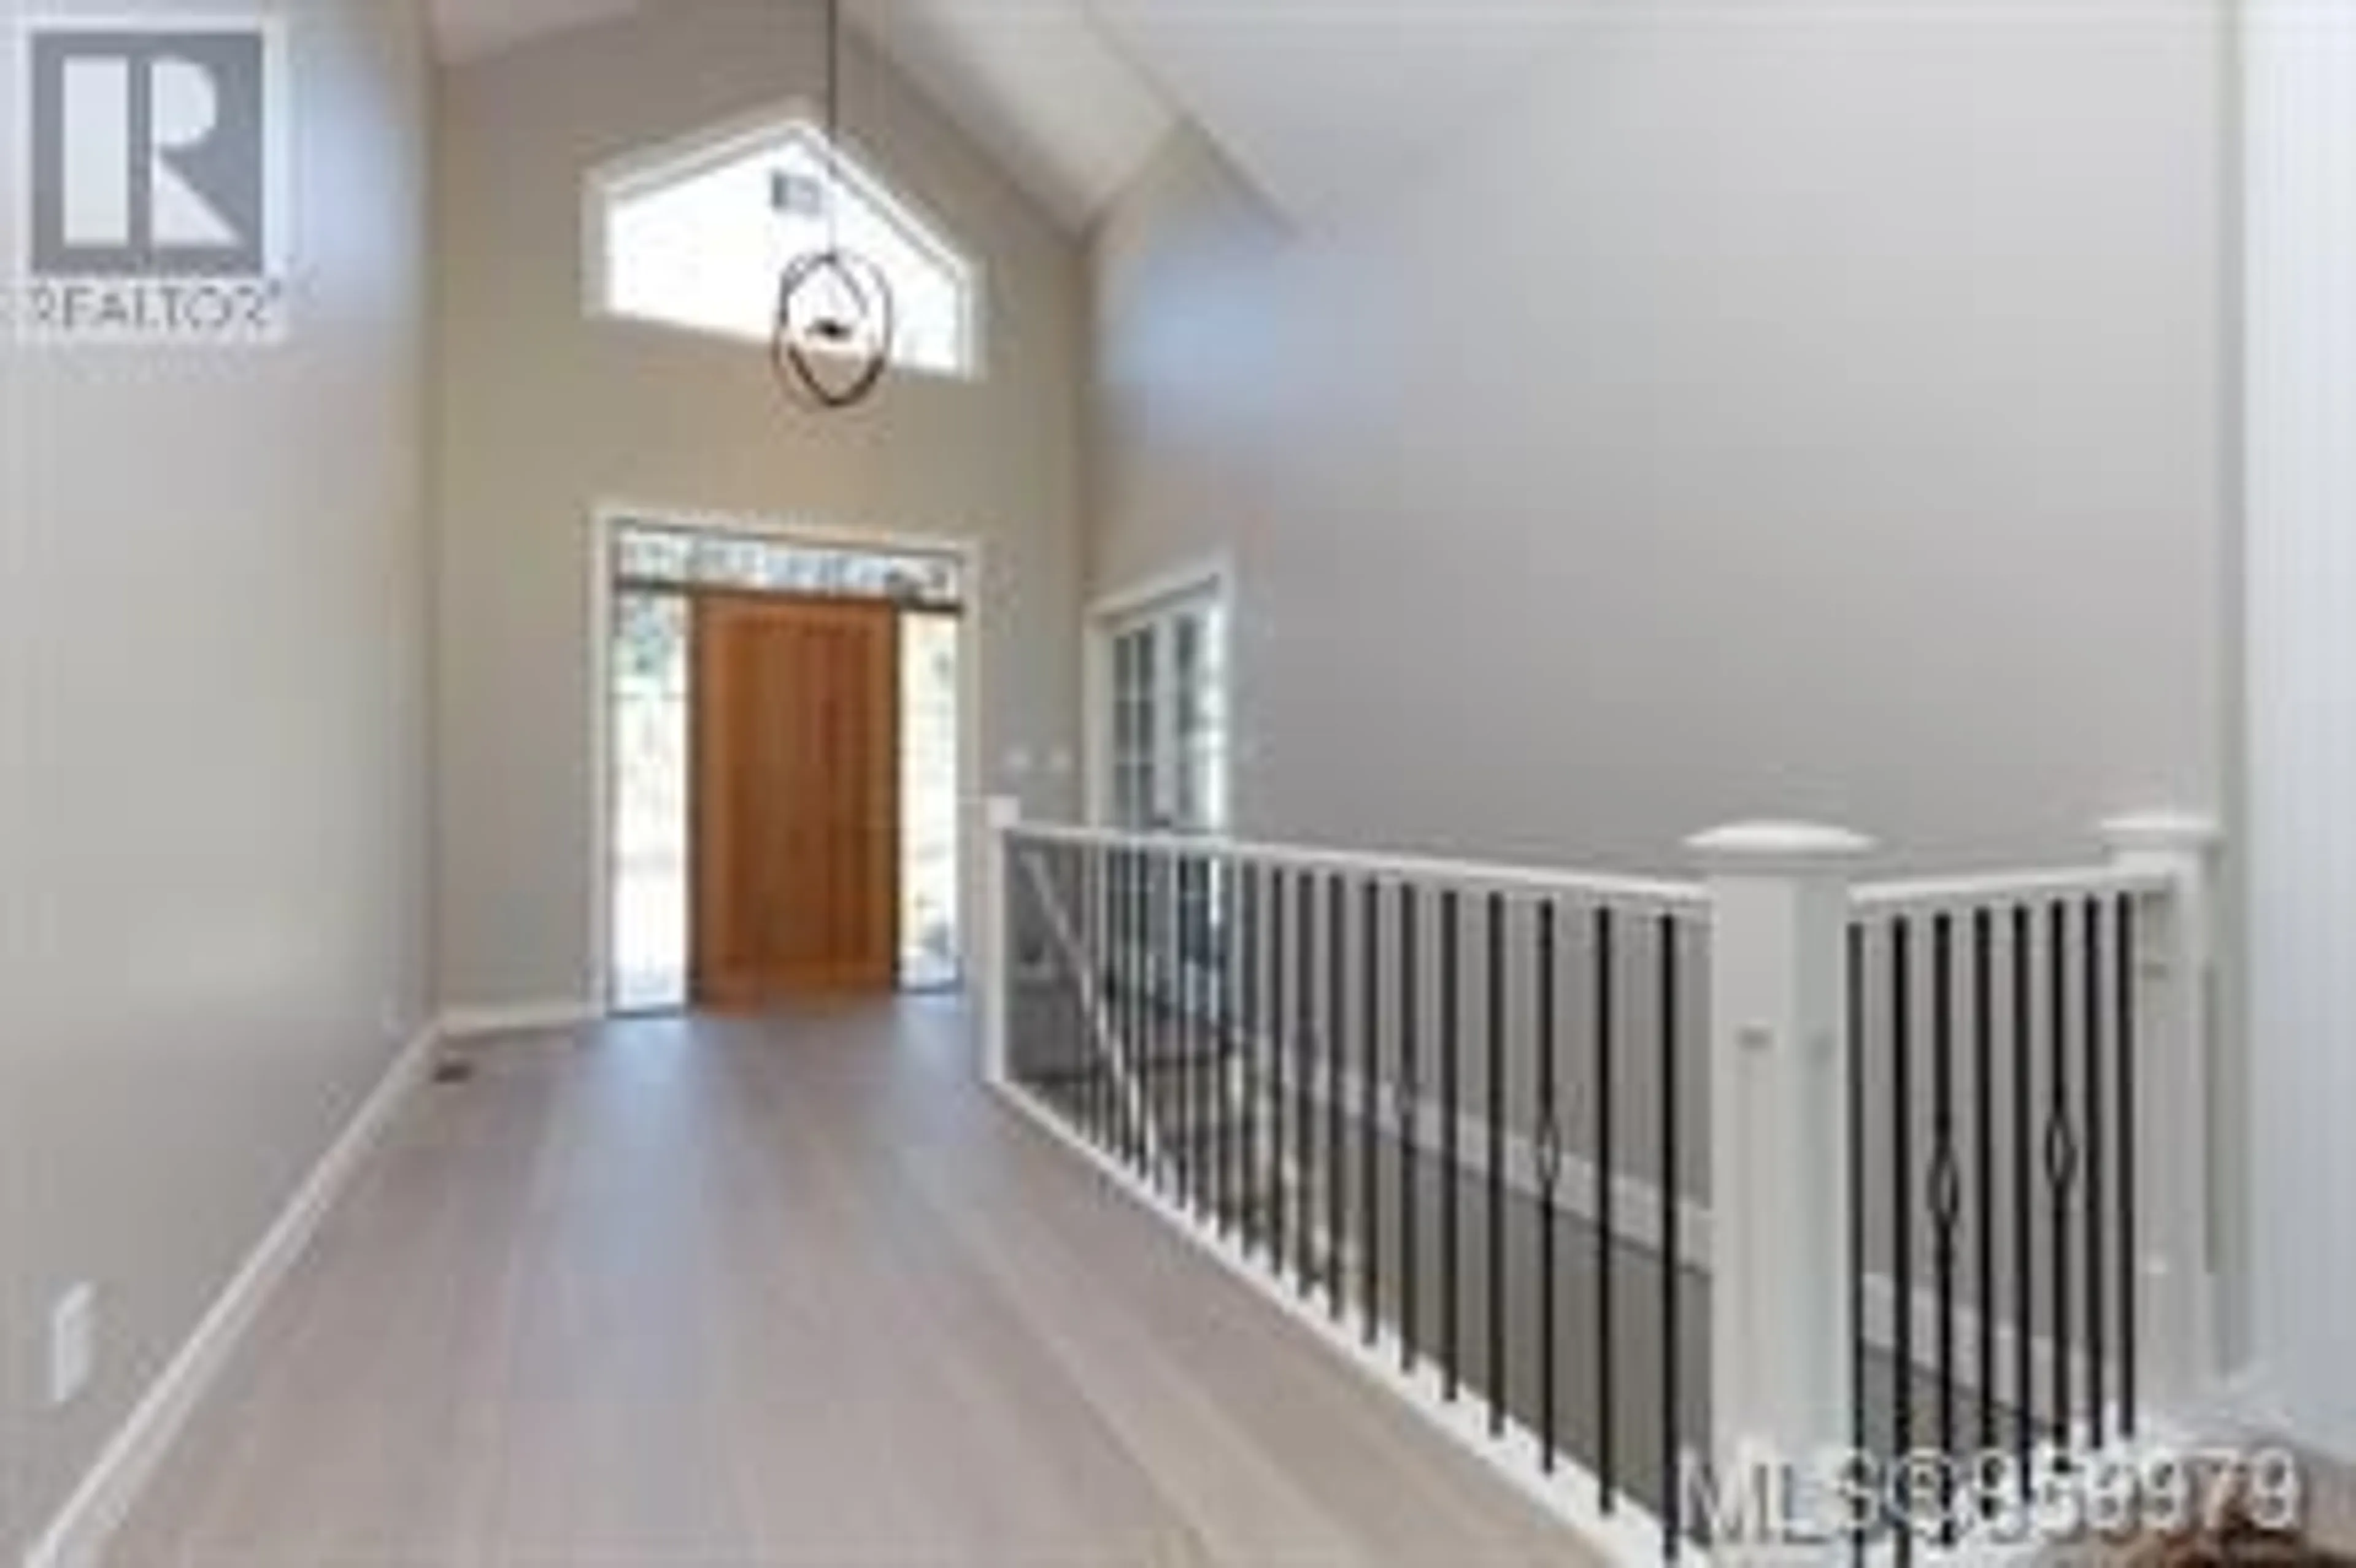 Indoor entryway for 2136 Champions Way, Langford British Columbia V9B0E3